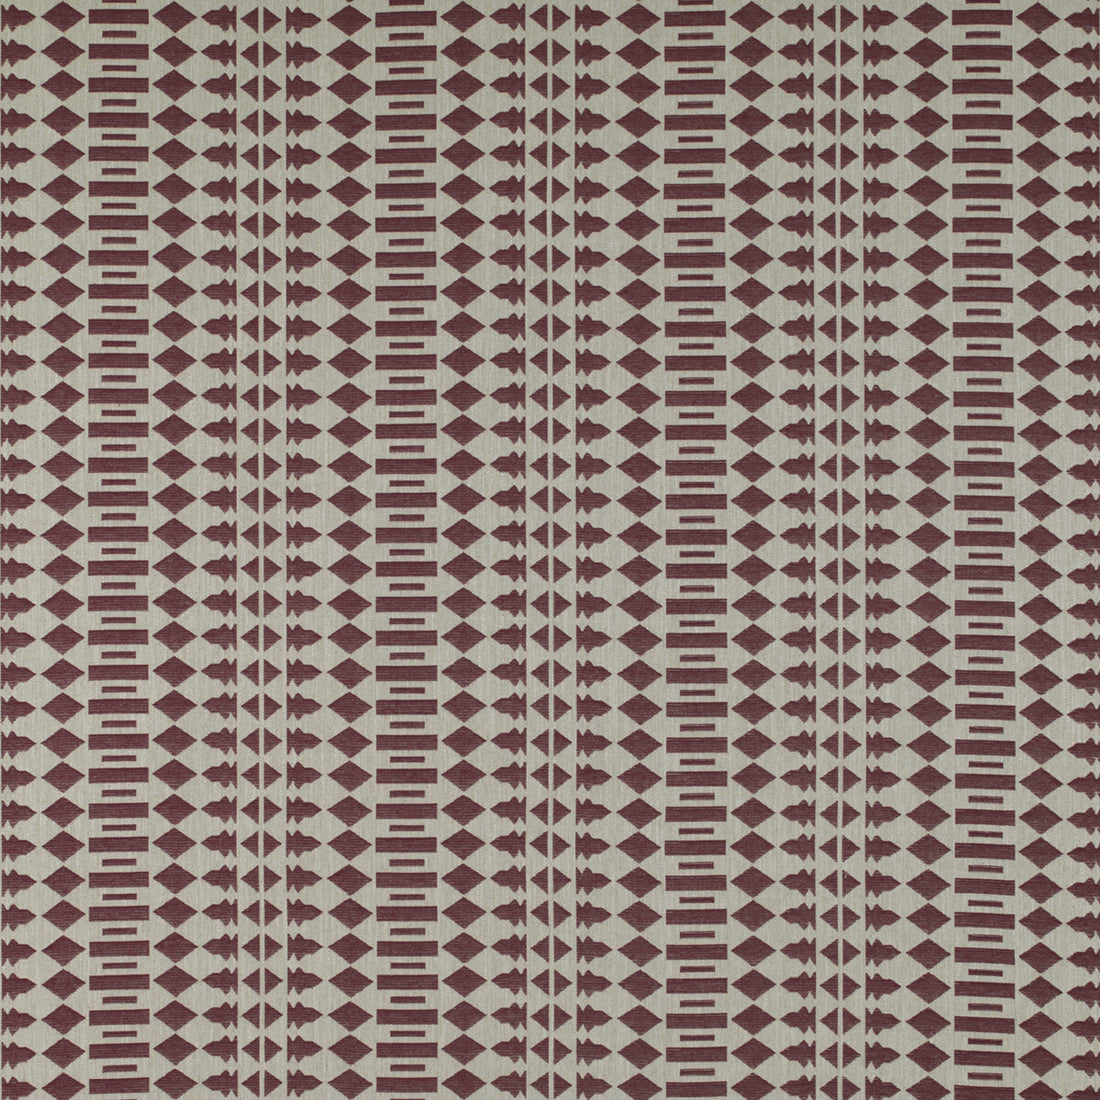 Pavia fabric in burdeos color - pattern GDT5322.005.0 - by Gaston y Daniela in the Tierras collection